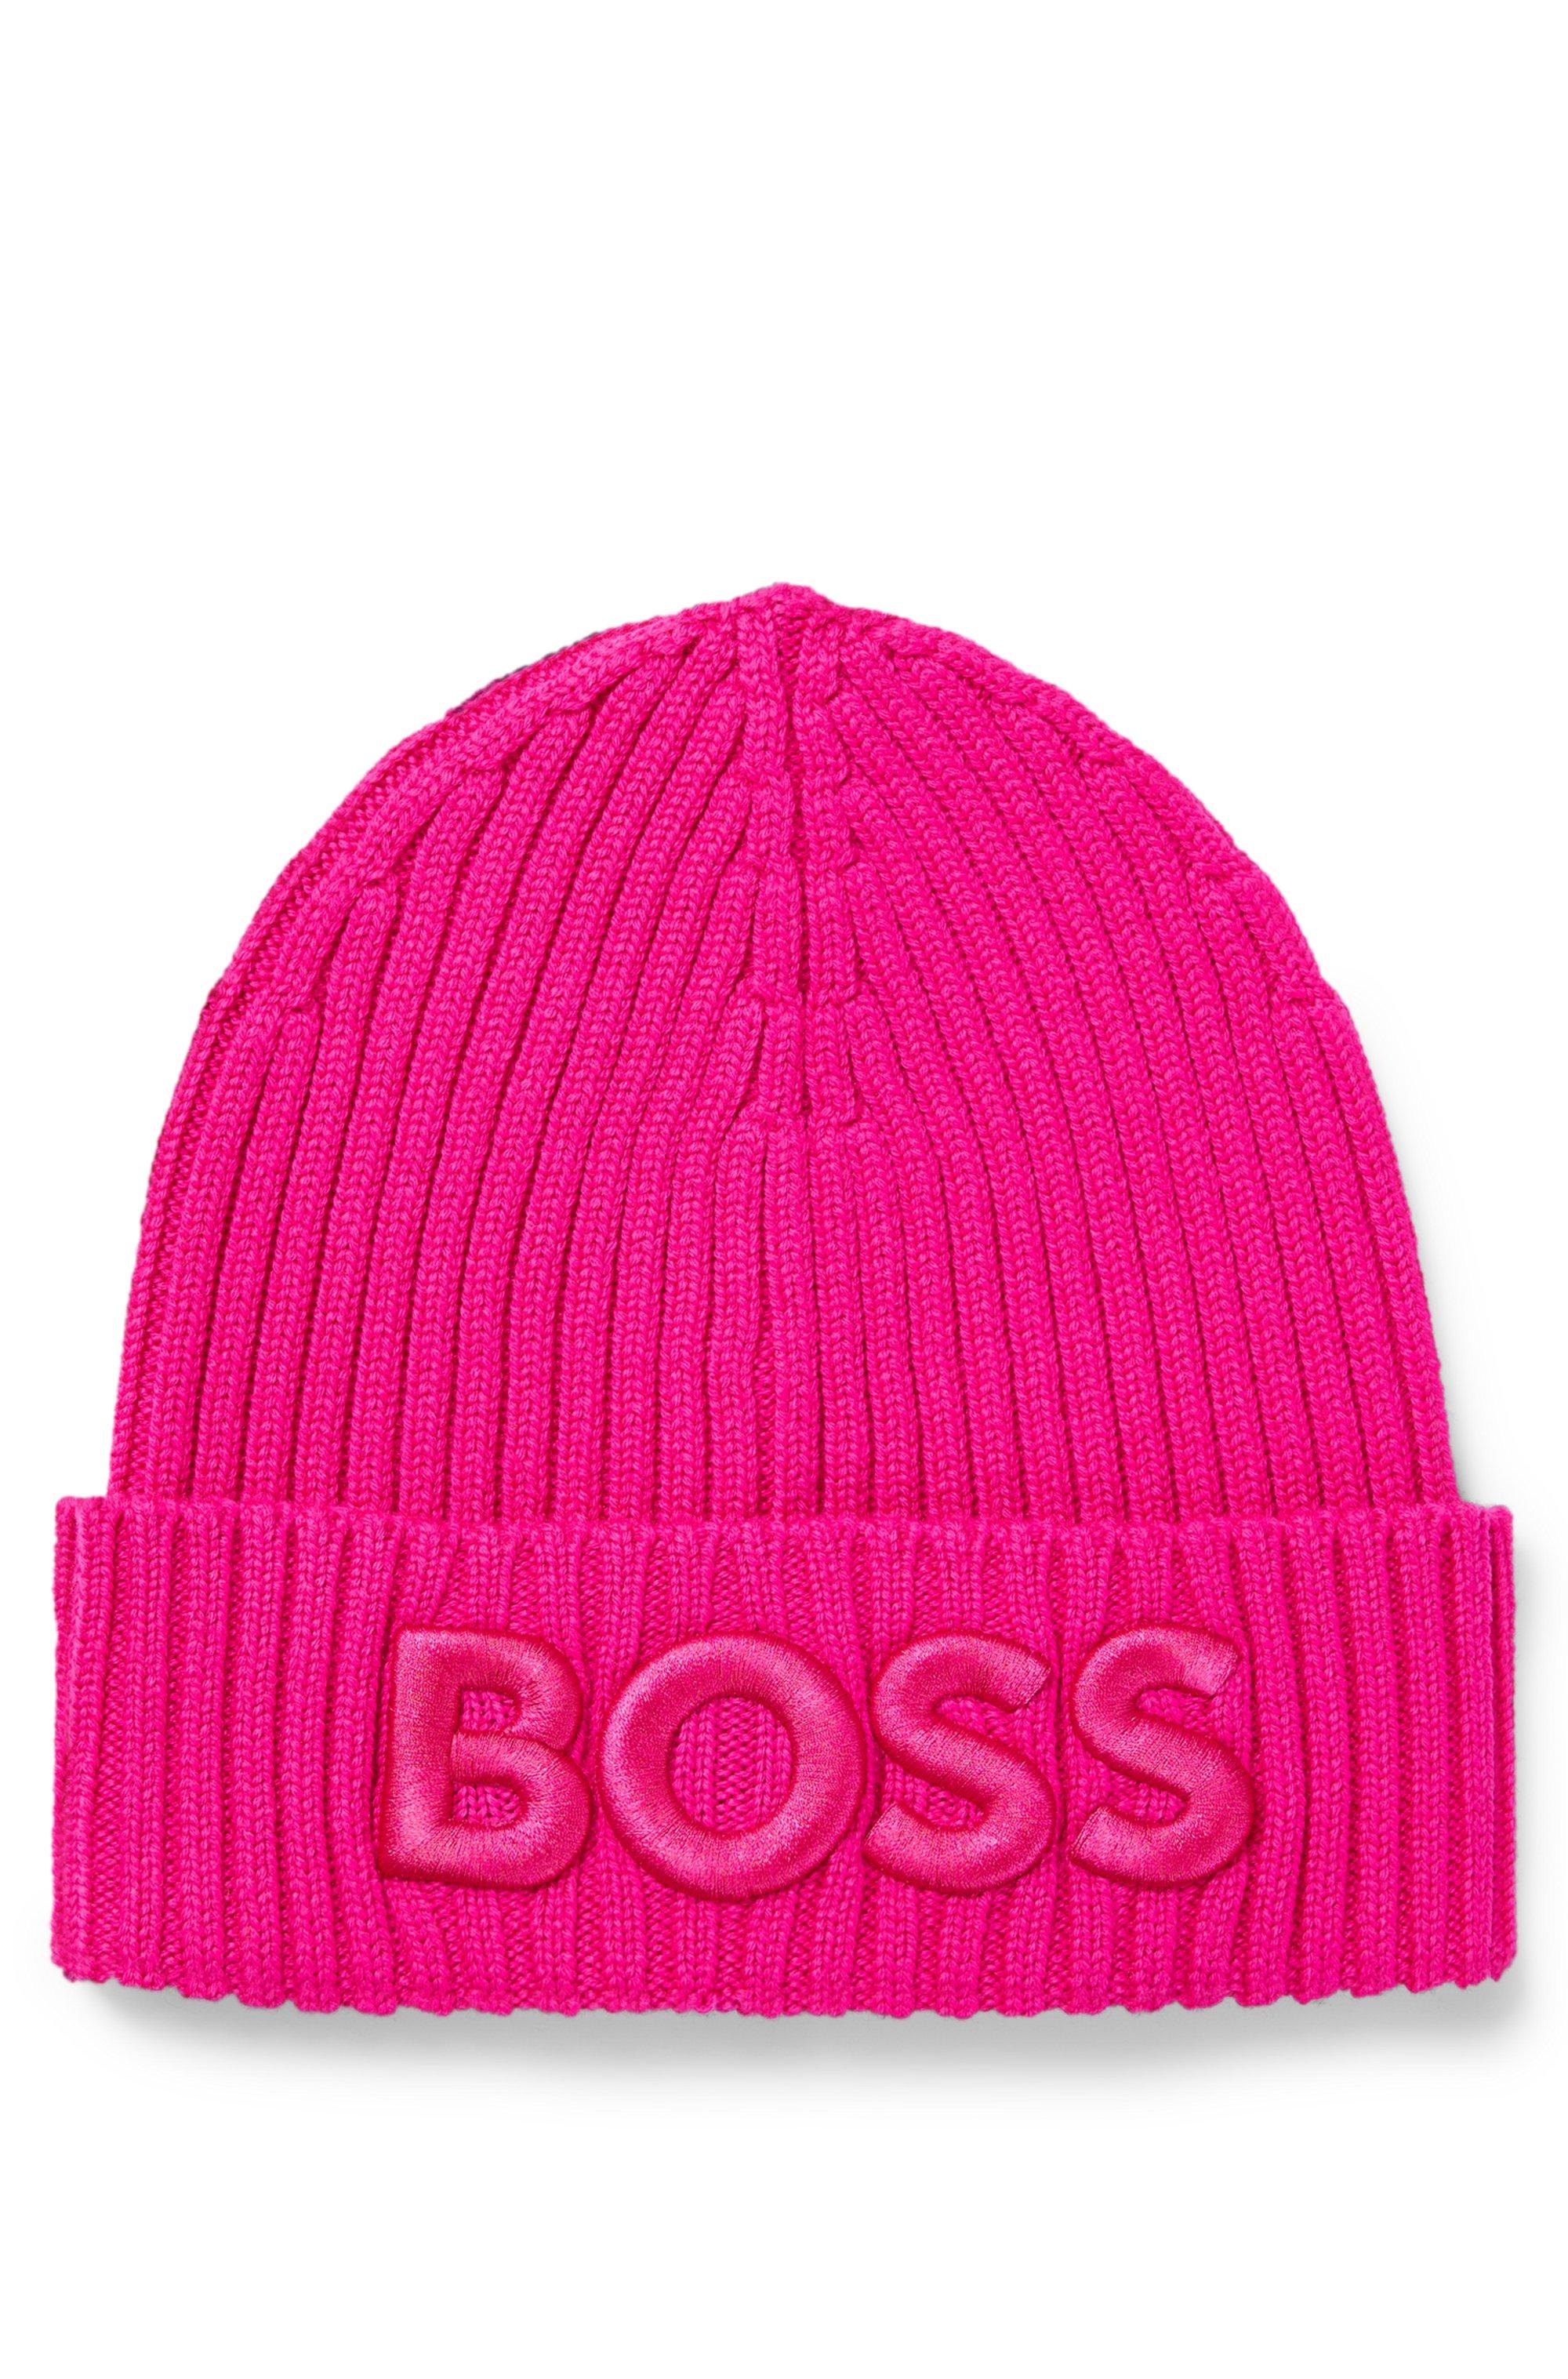 BOSS Logo-embroidered Rib-knit Beanie Hat In Virgin Wool in Pink